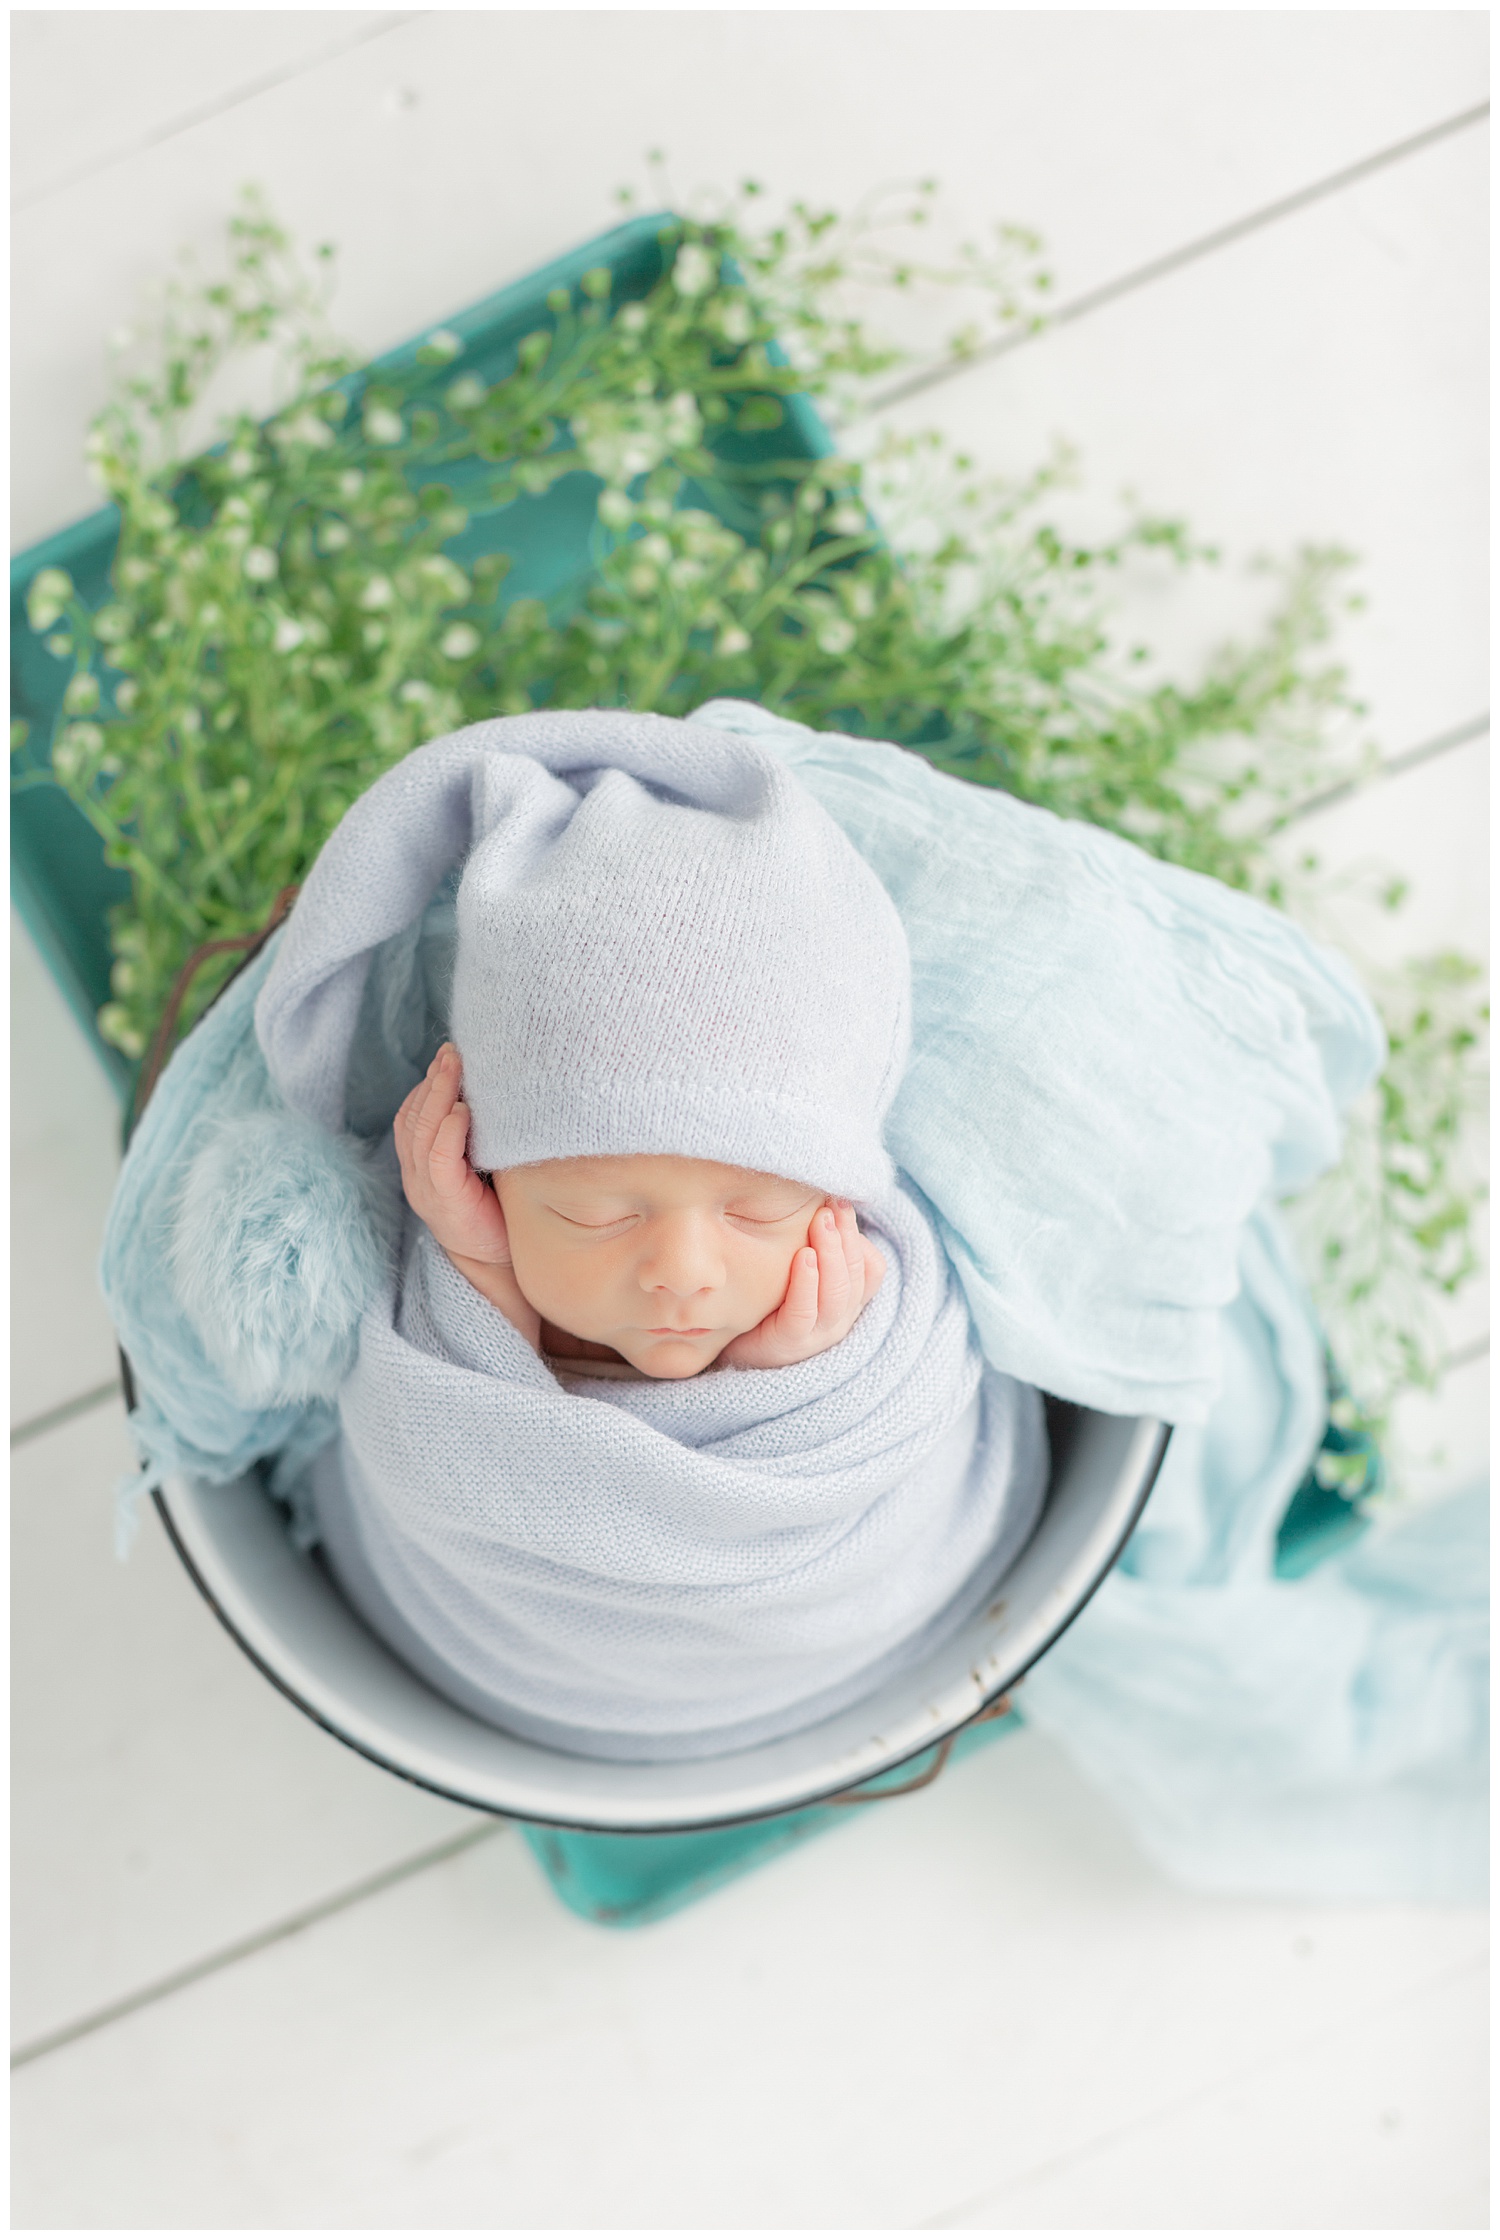 Baby boy Hayes lays in a bucket surrounded with greenery while swaddled in a soft knit blue wrap and night cap | CB Studio